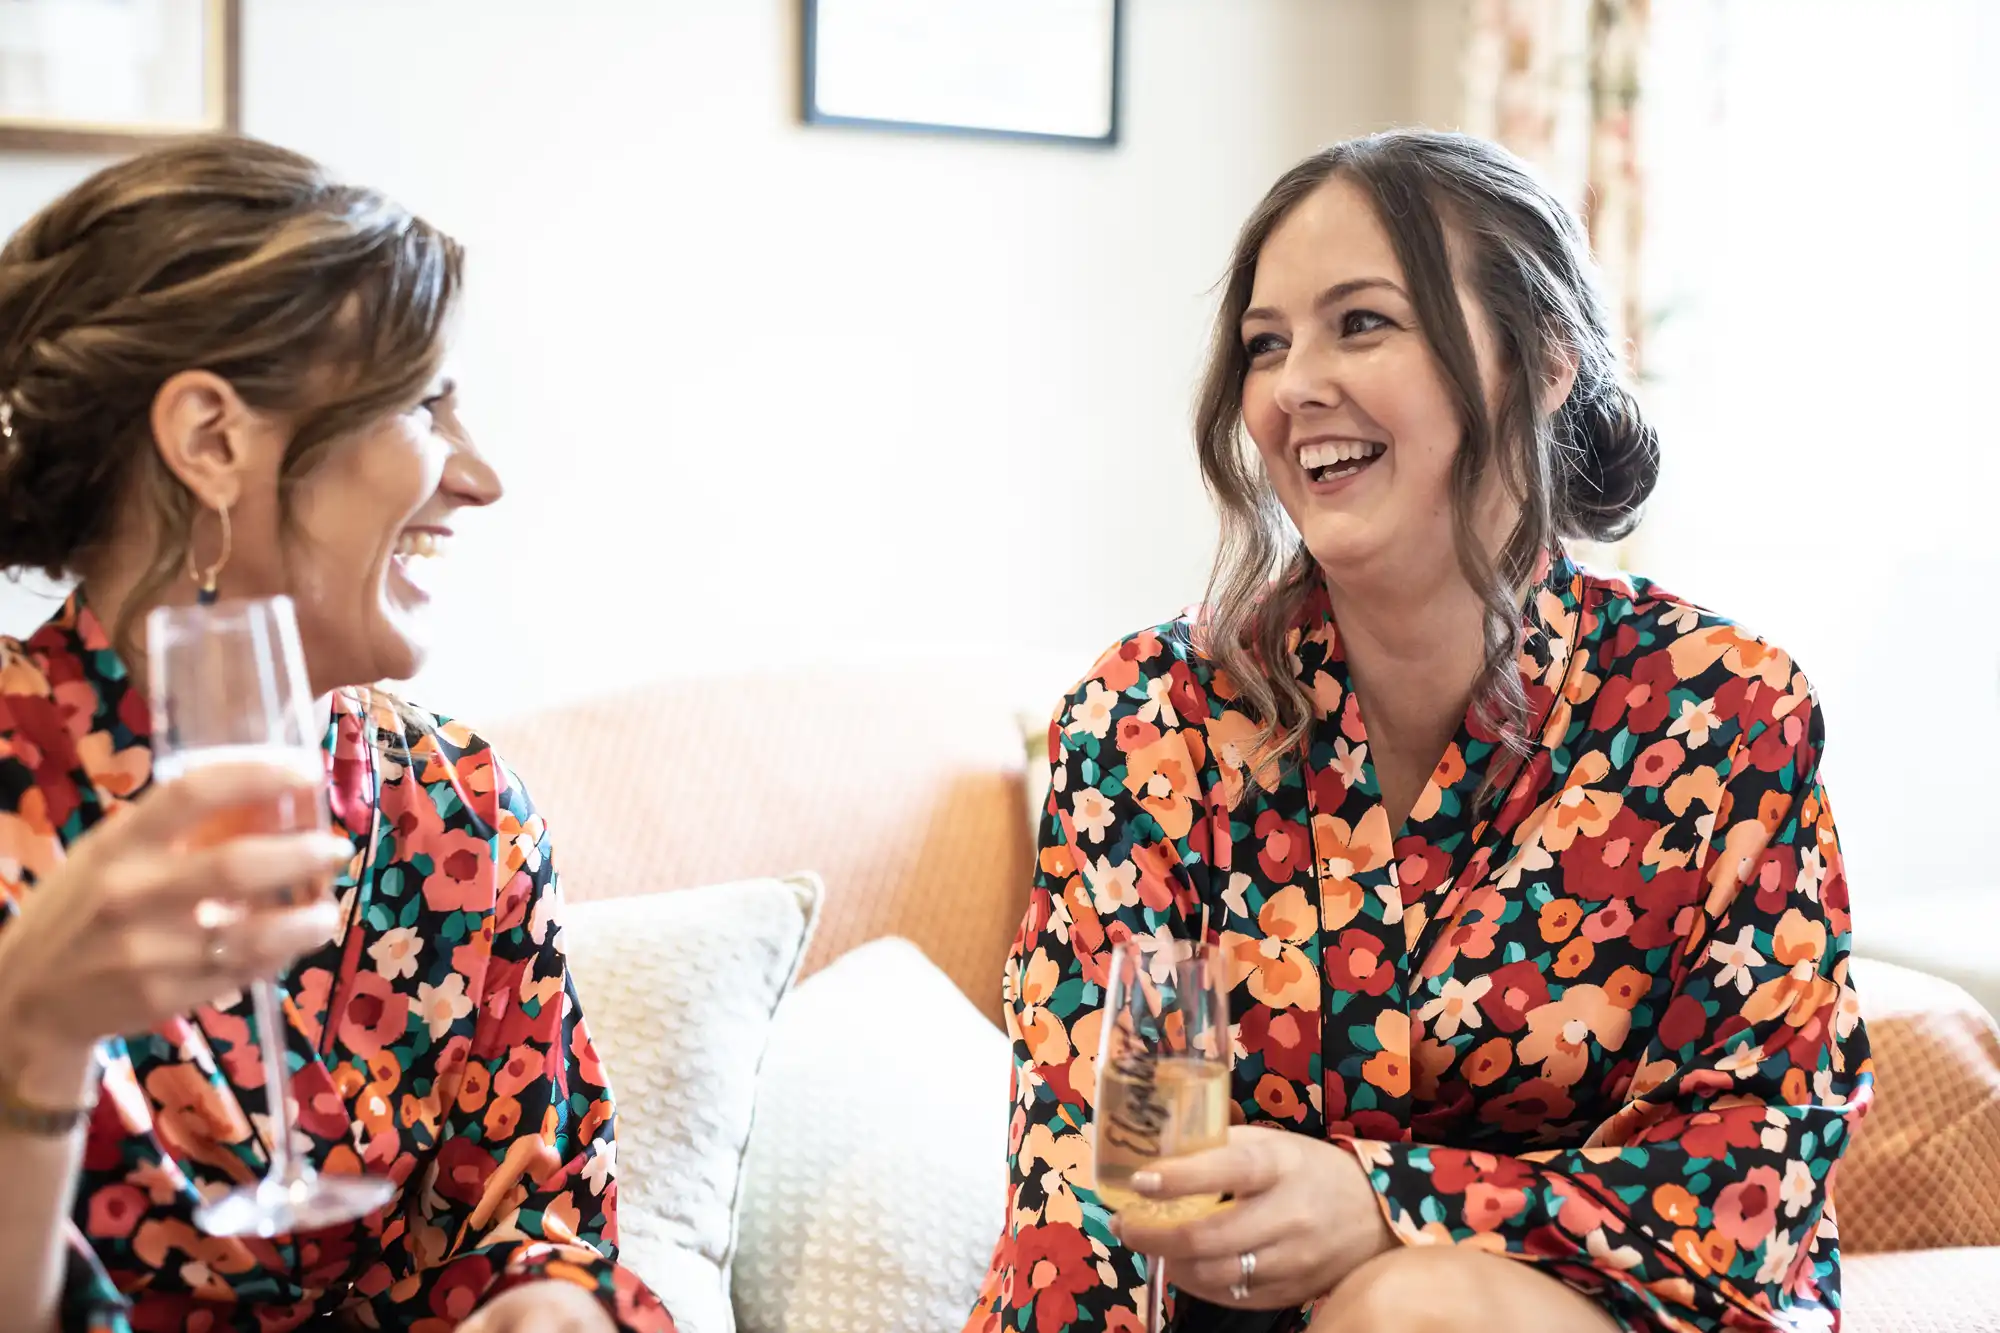 Two women laughing and holding glasses of wine, sitting on a sofa, wearing floral dresses in a well-lit living room.